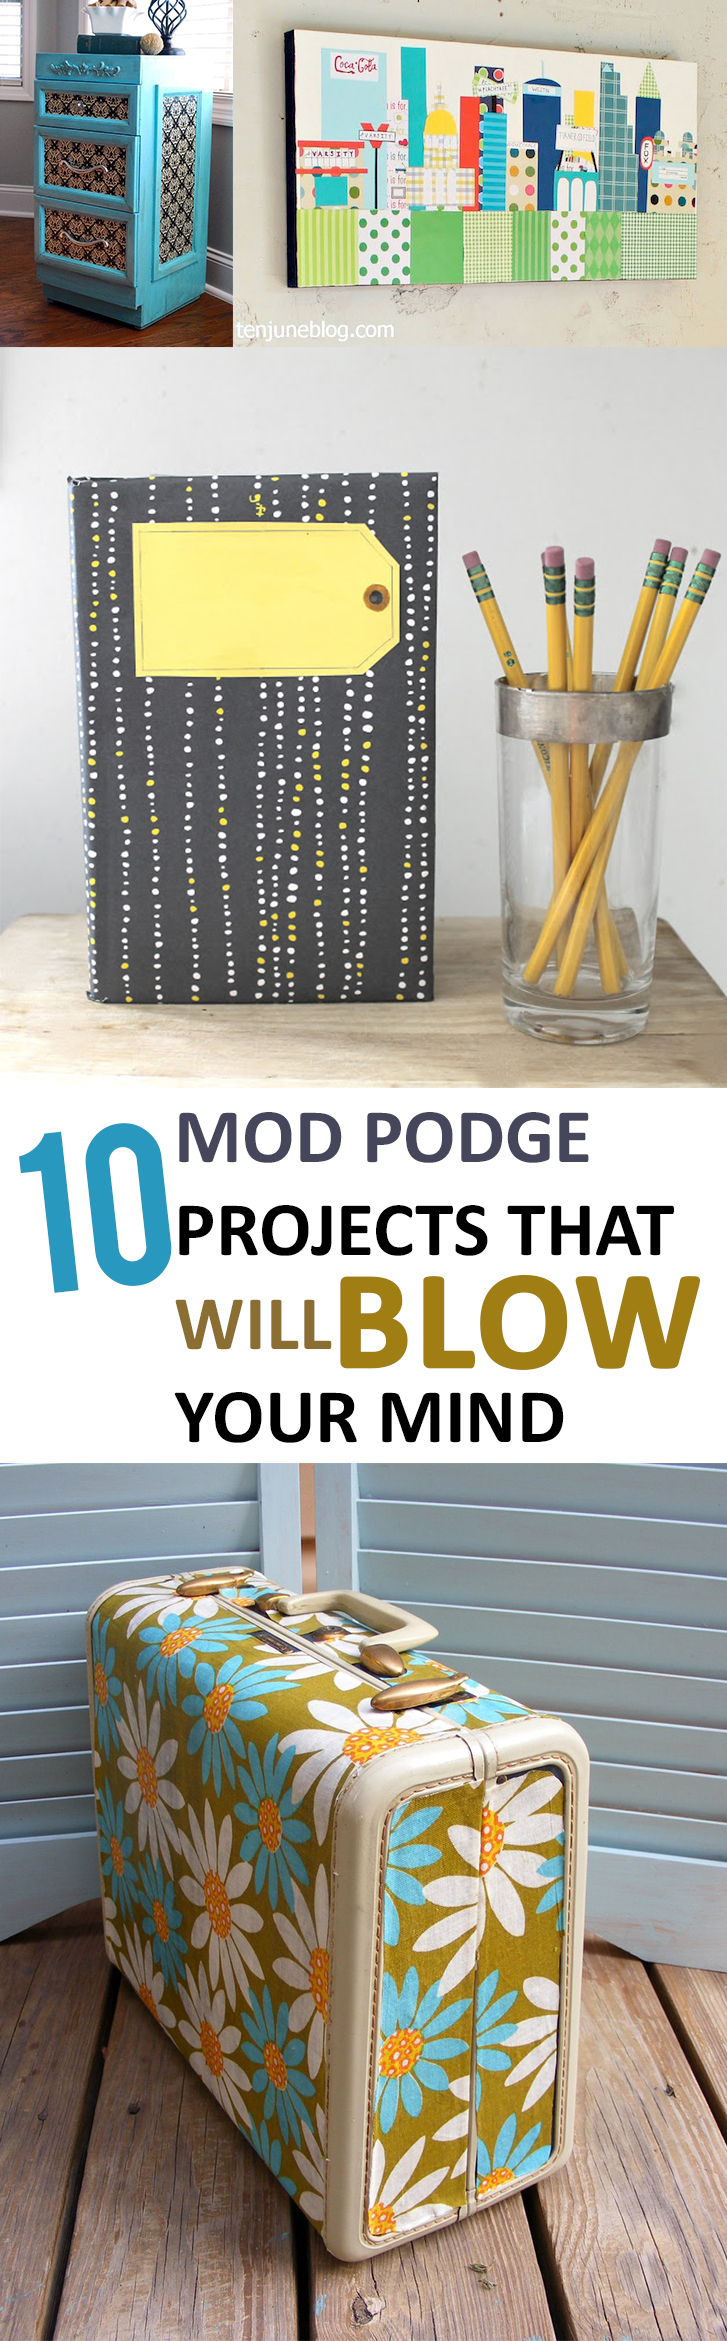 10 Mod Podge Projects that Will Blow Your Mind